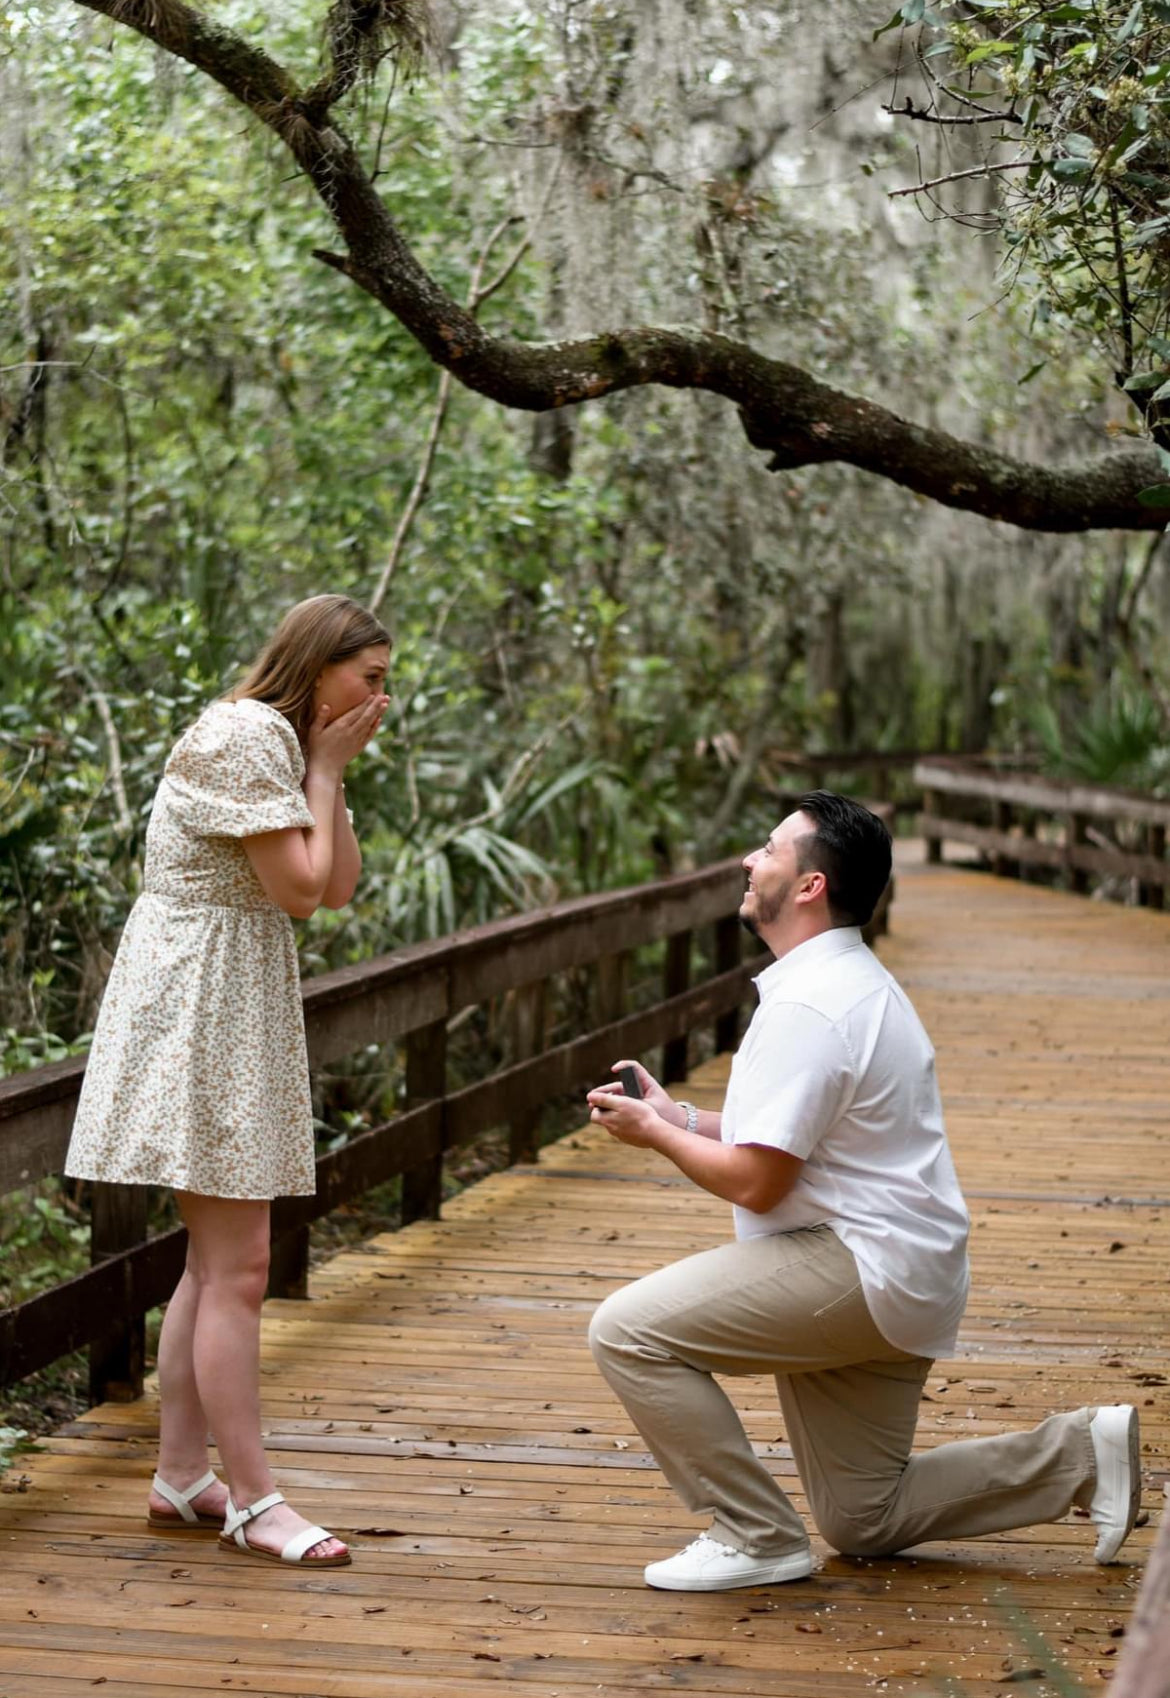 Couple on a wooden walkway in the woods, man proposing to her down on one knee